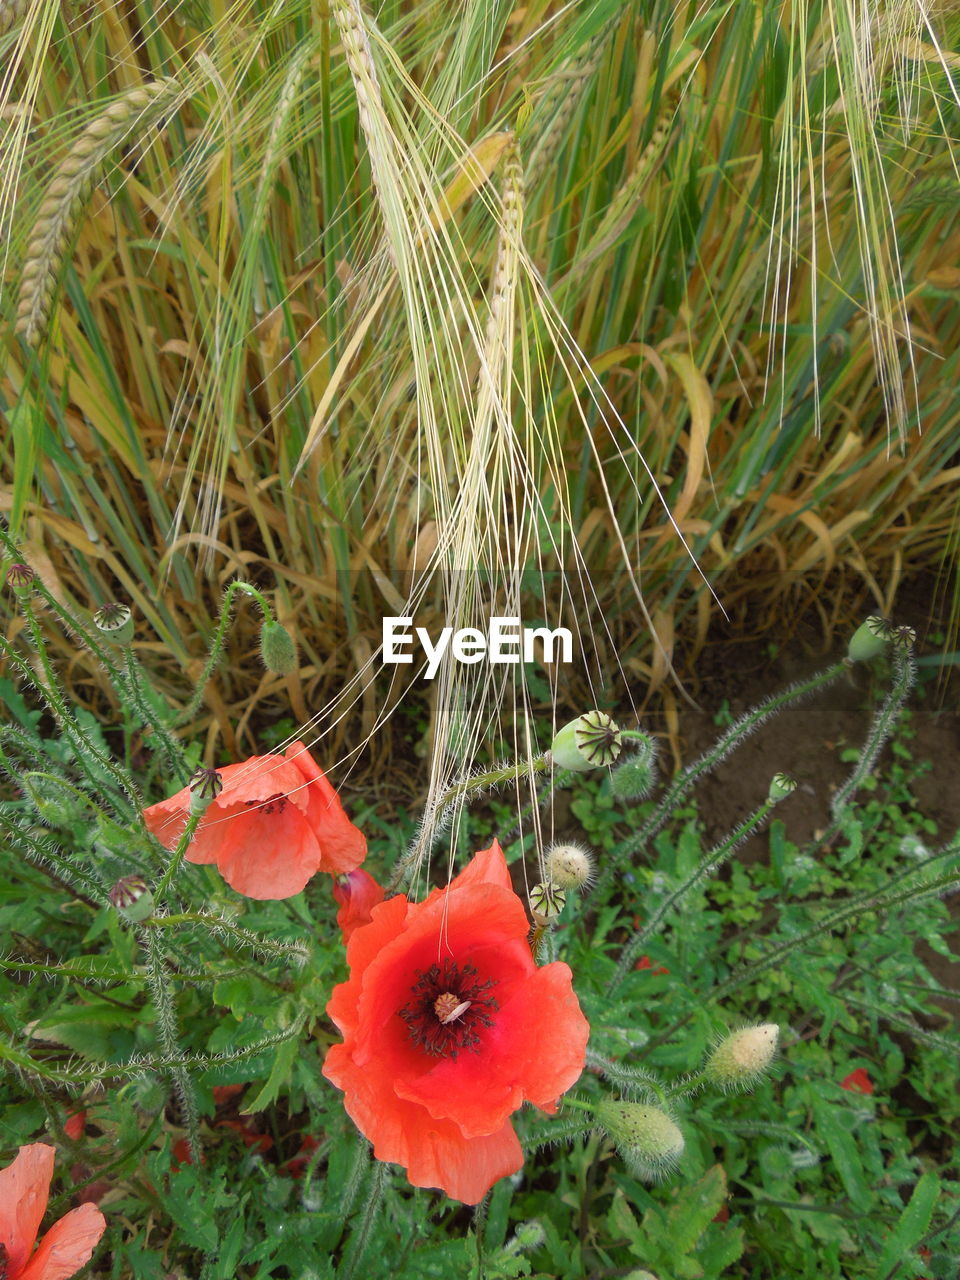 CLOSE-UP OF POPPY BLOOMING IN FIELD